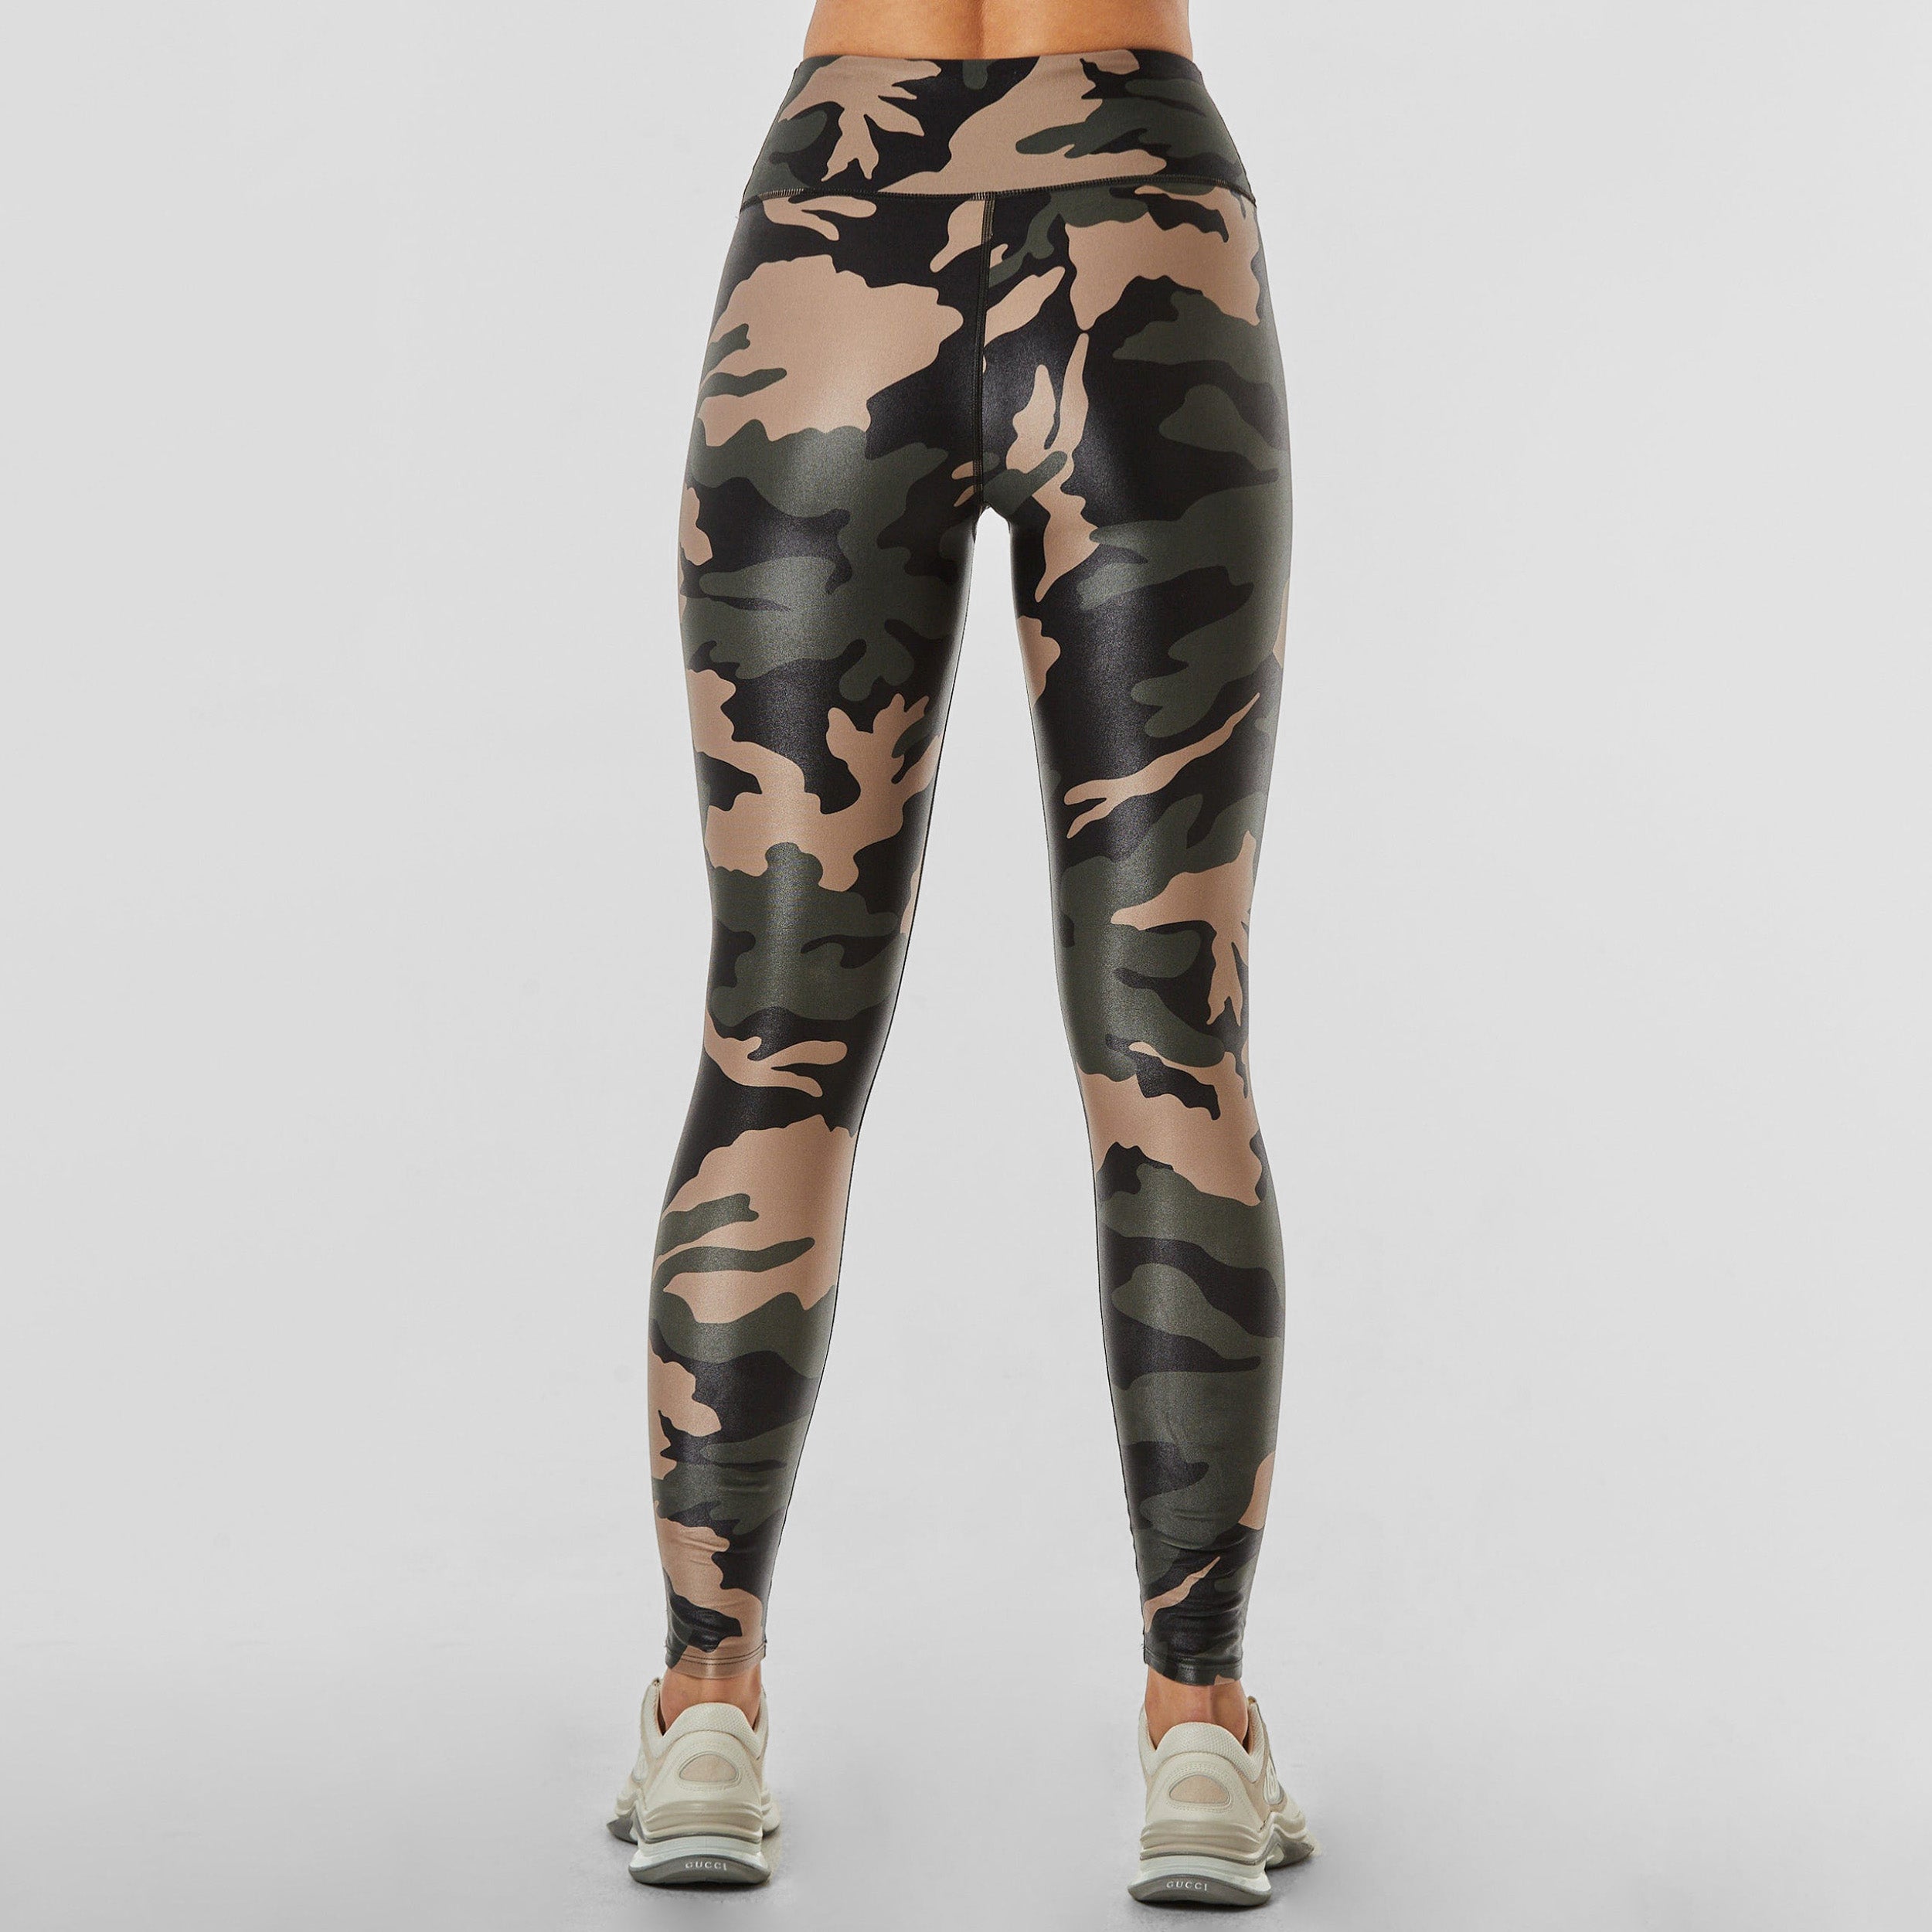 Rear view of woman wearing lightweight, lustrous shine, quick drying camo printed liquid leggings